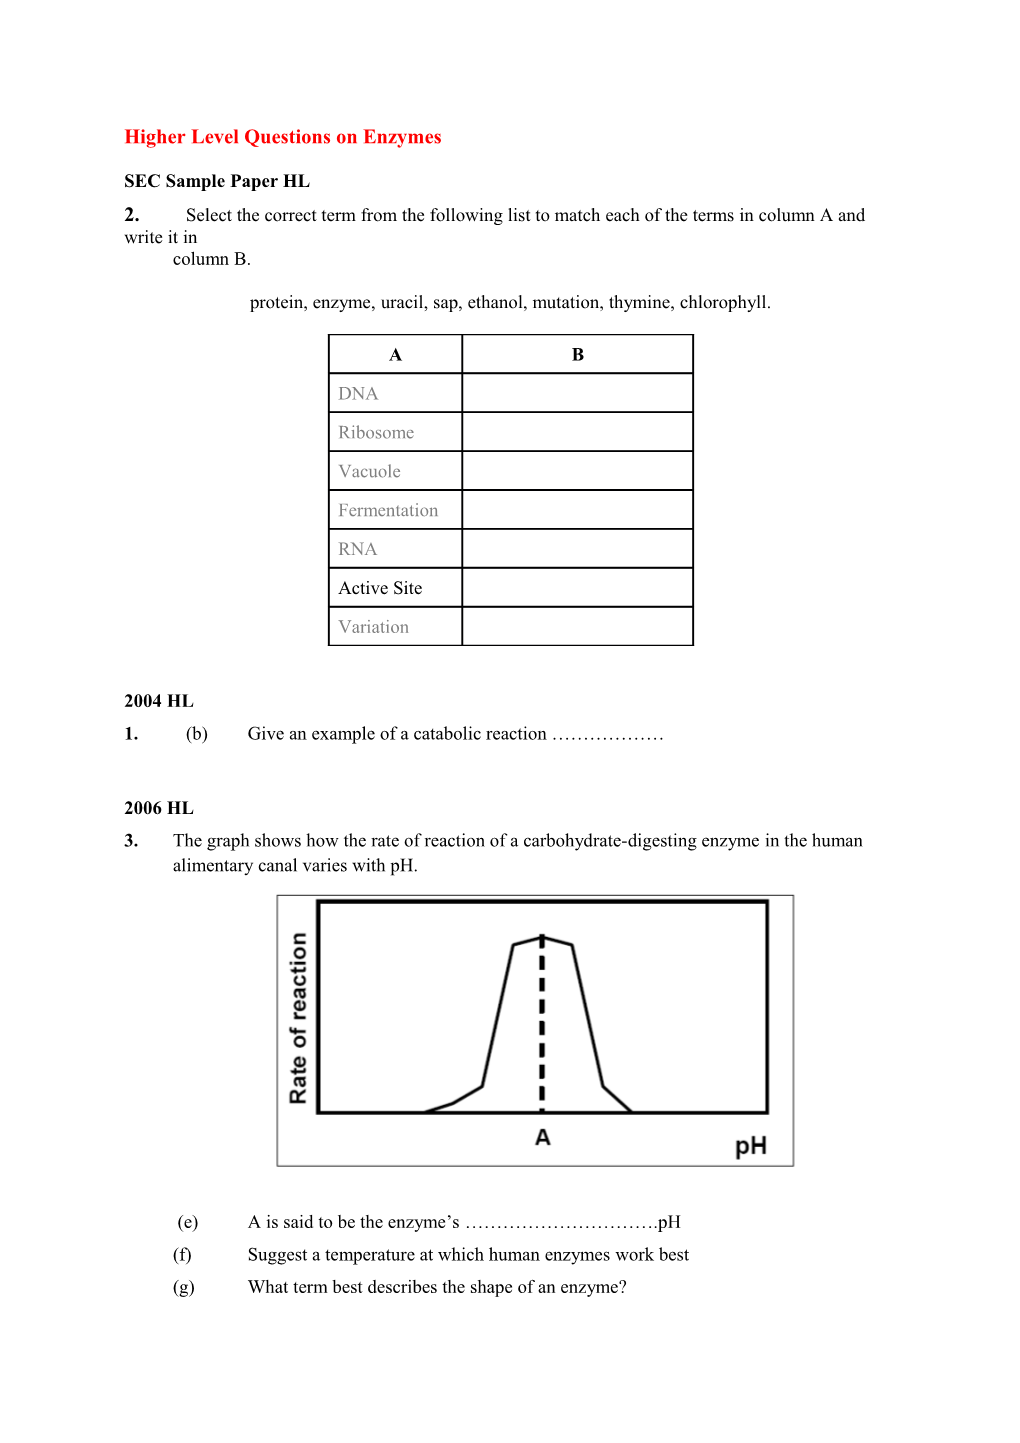 Higher Level Questions on Enzymes